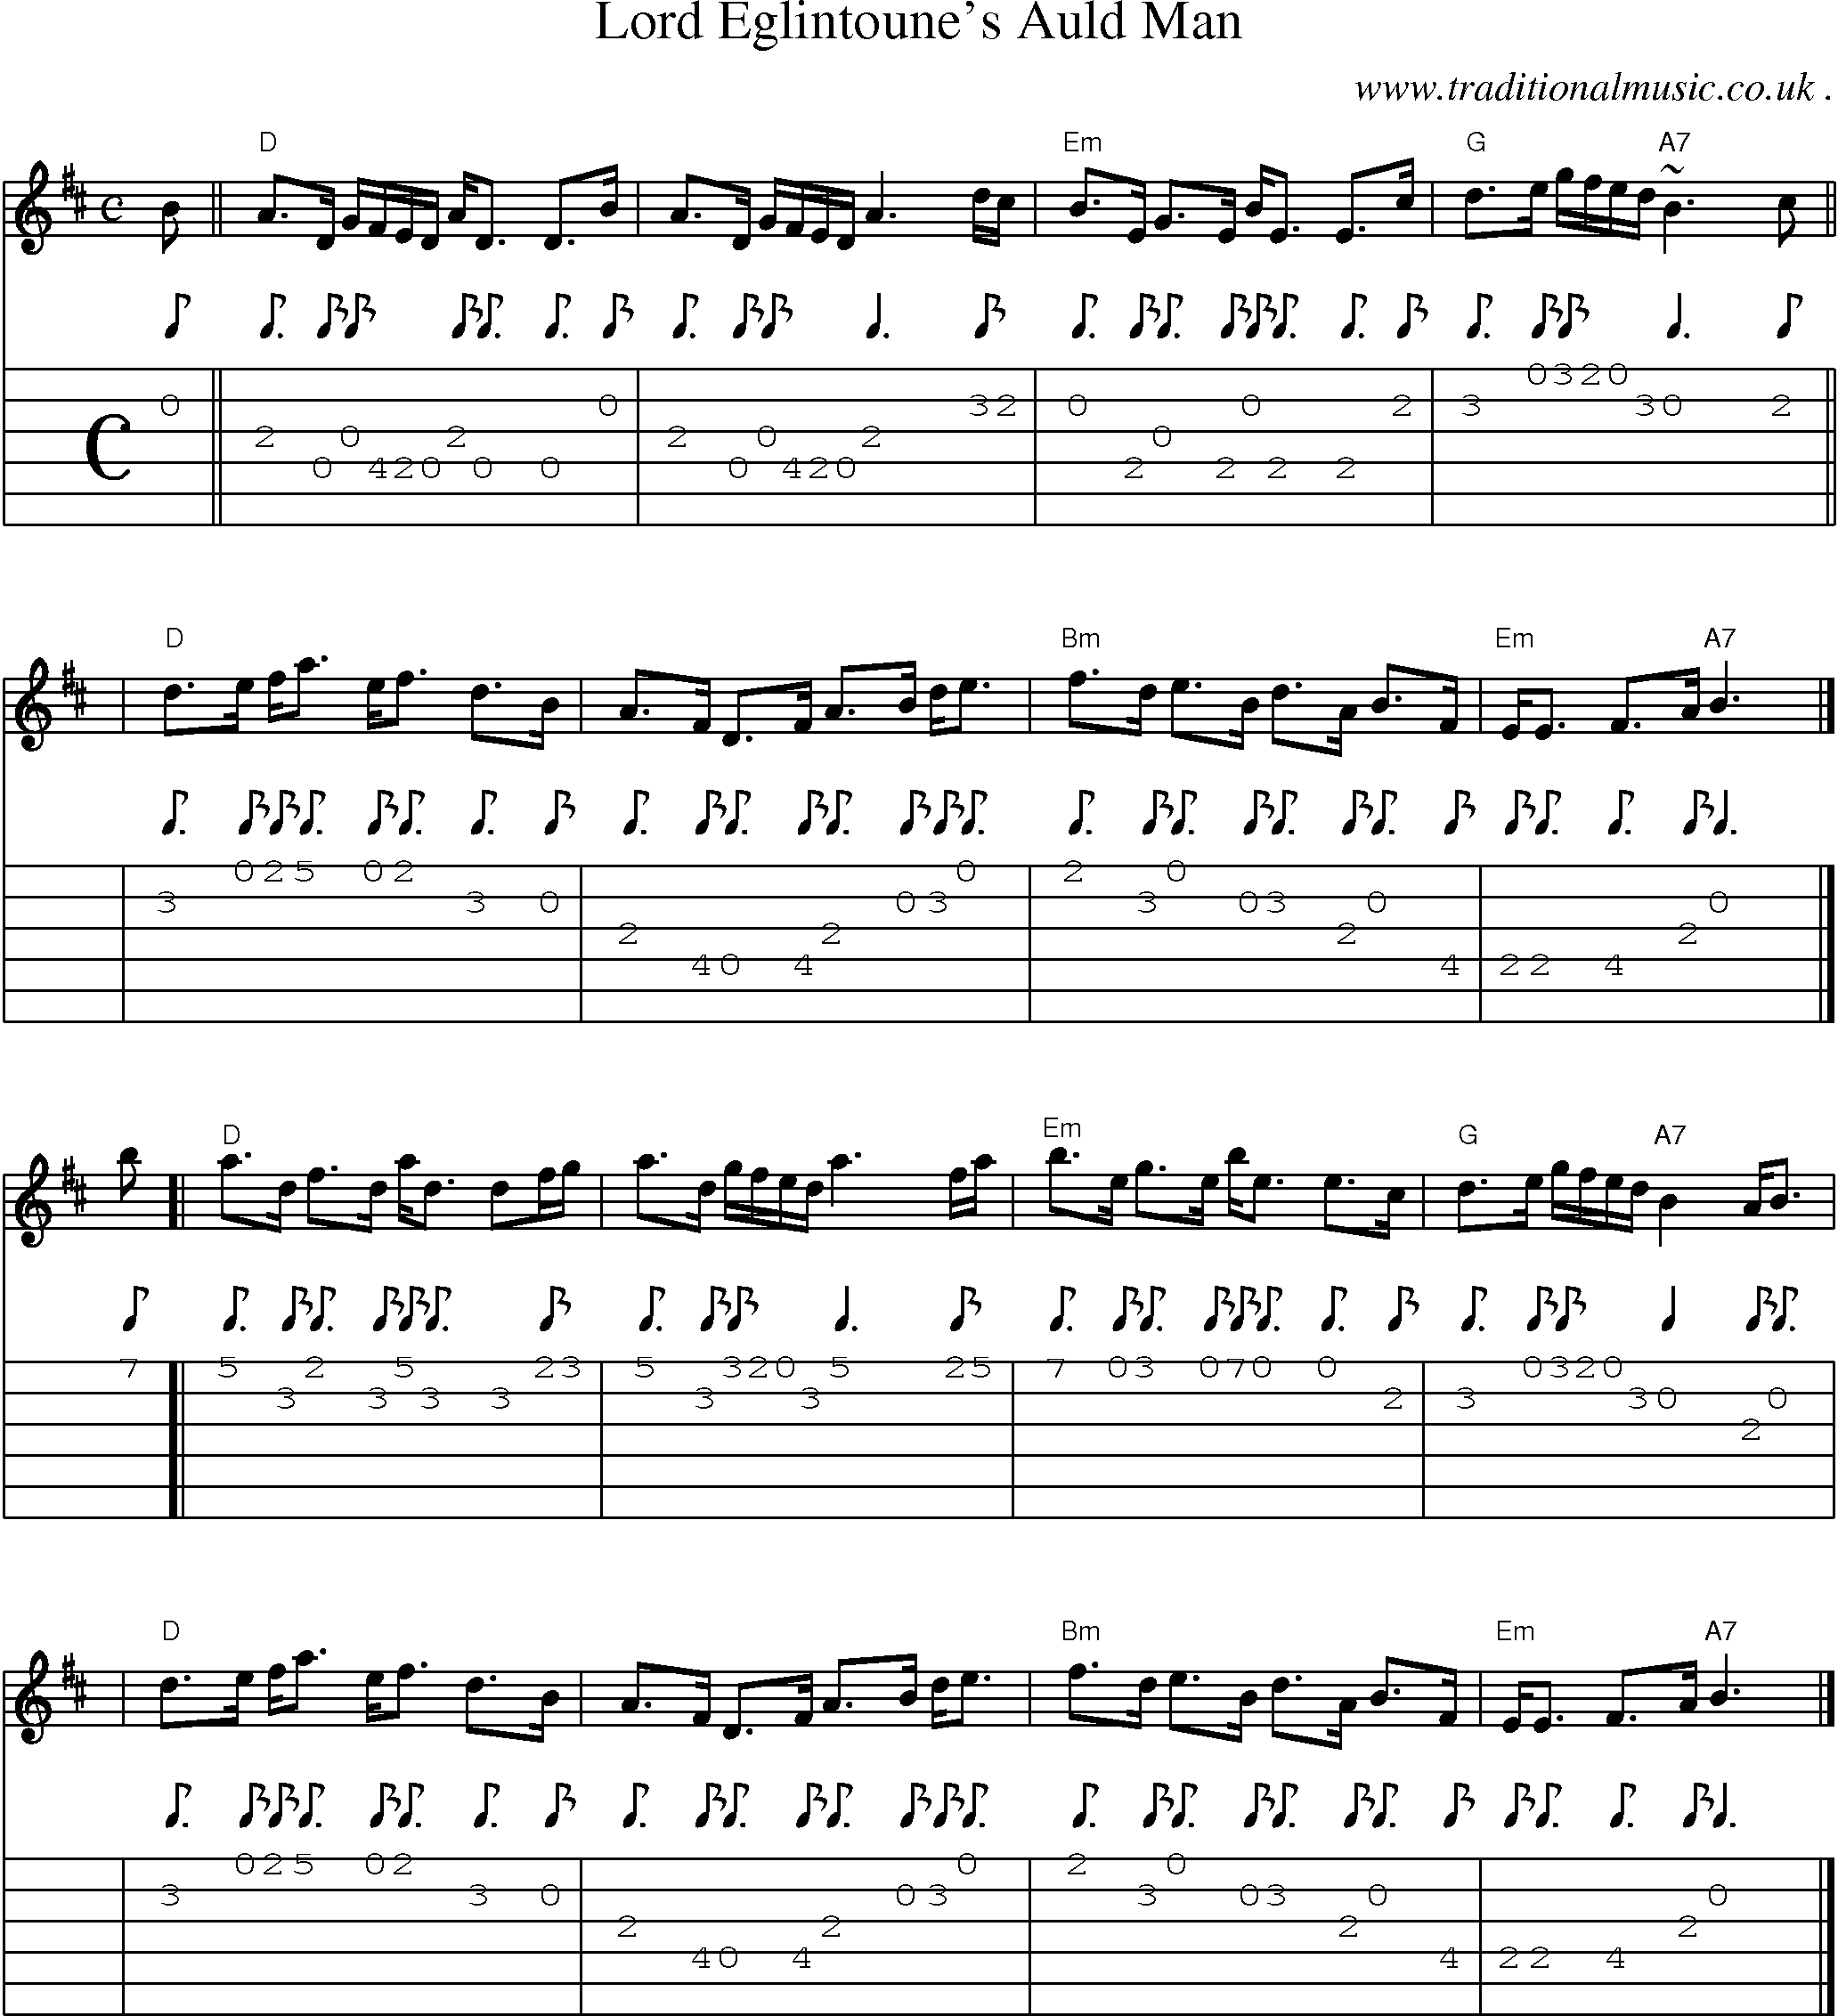 Sheet-music  score, Chords and Guitar Tabs for Lord Eglintounes Auld Man